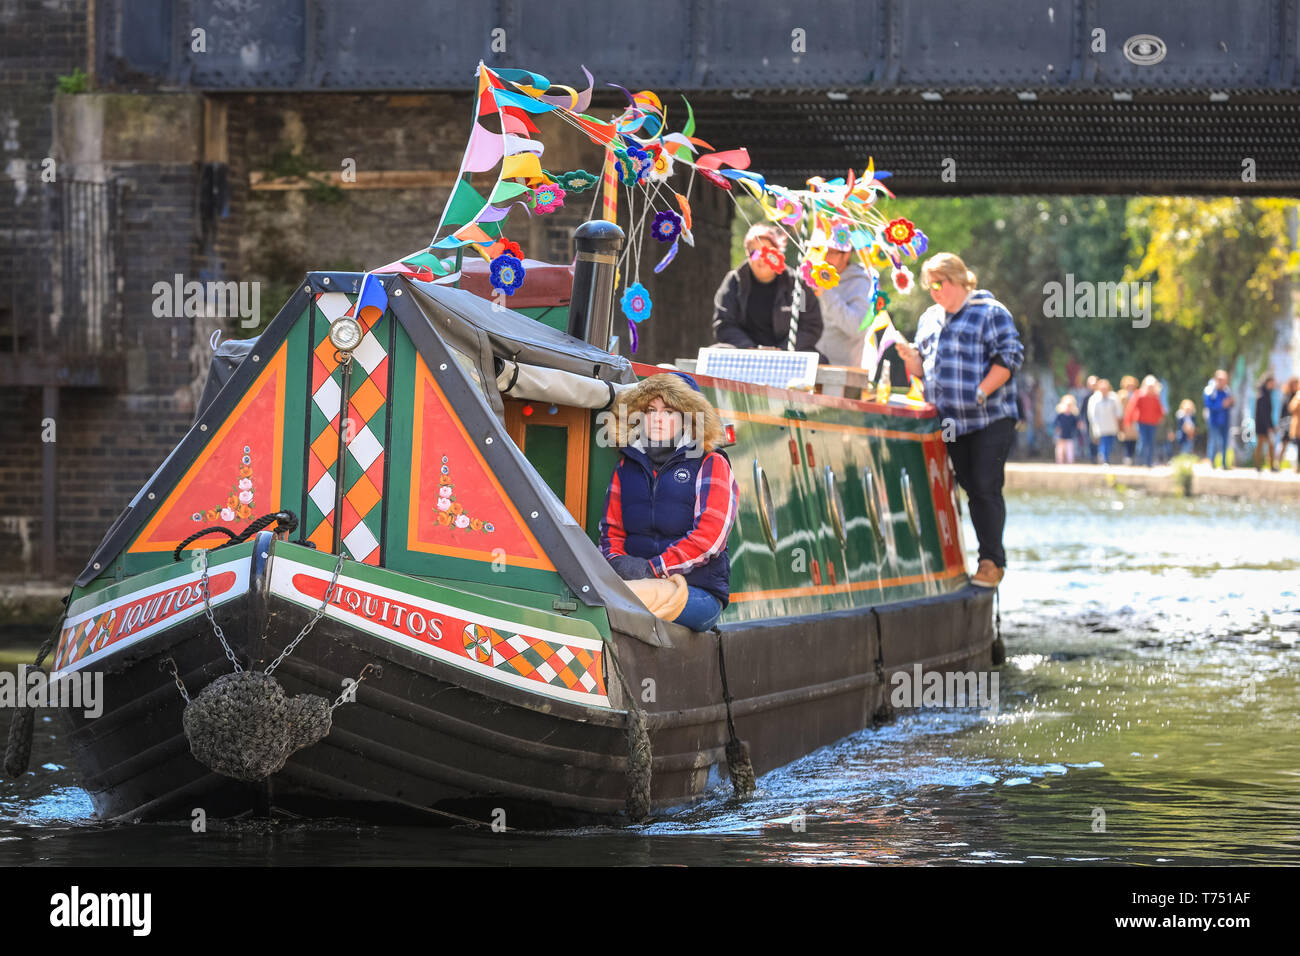 London, UK. 4th May, 2019. The 'Iquitos' passes under a bridge. The popular festivities are organised by the Inland Waterways Association and will run 4-6th May and will feature more than 100 boats this year with canal boat pageants, an illuminated boat parade, music, stage performances and water sports along pool and Grand Union Canal in Little Venice.Little Venice, London, UK, 4th May 2019. Mark Saxon, IWA Canalway Cavalcade Chairman, shows of this year's red canal boat hat. Credit: Imageplotter/Alamy Live News Stock Photo